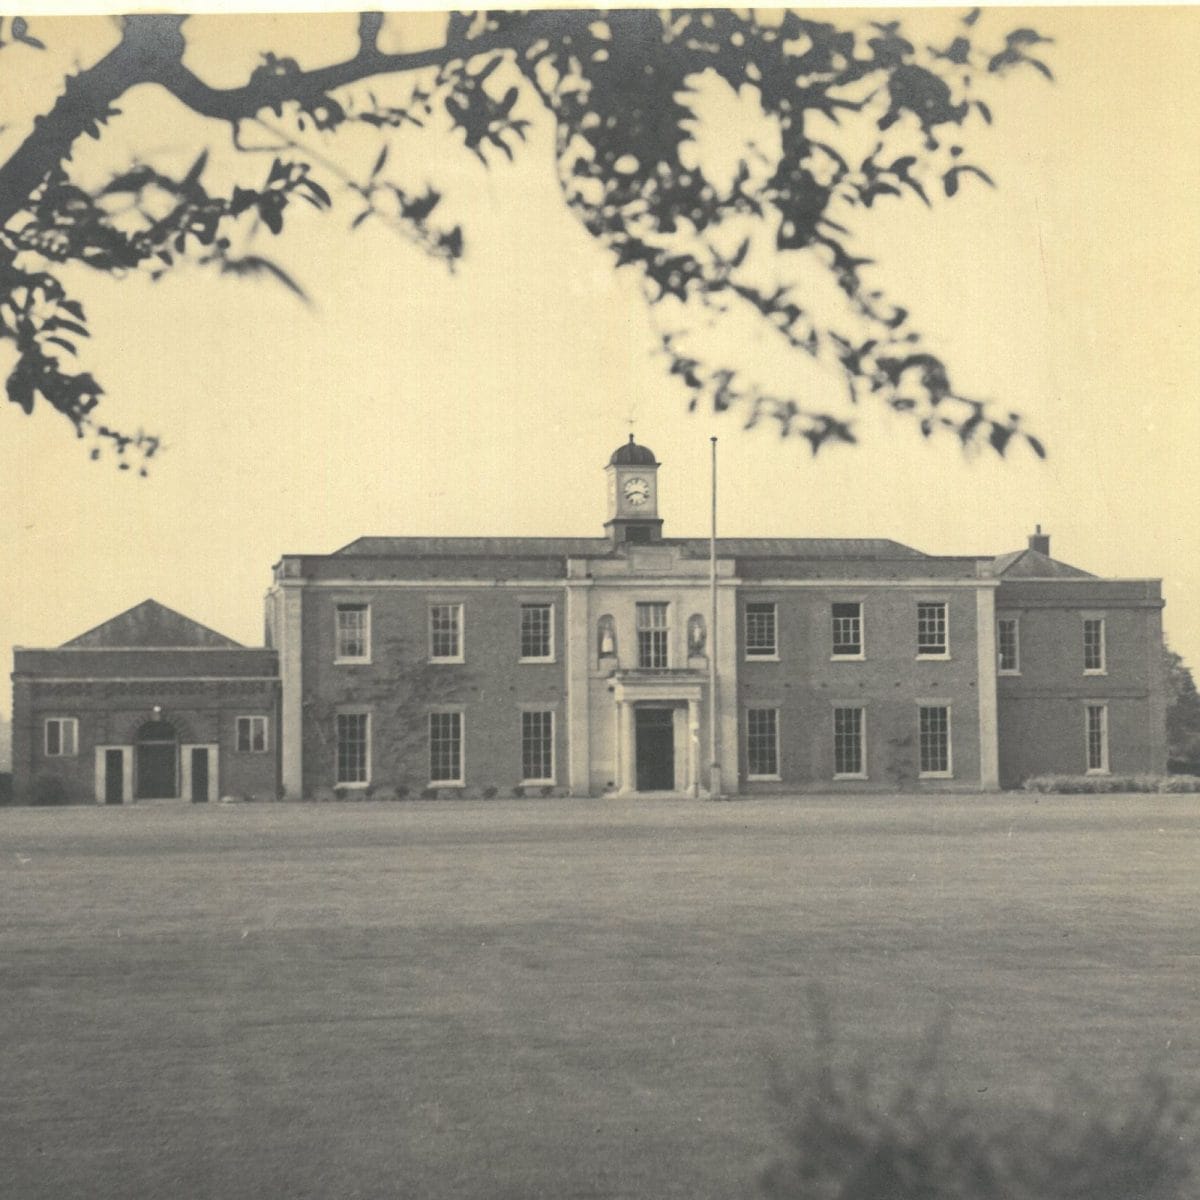 A picture of the Blue Coat School after its relocation to Harborne in 1930